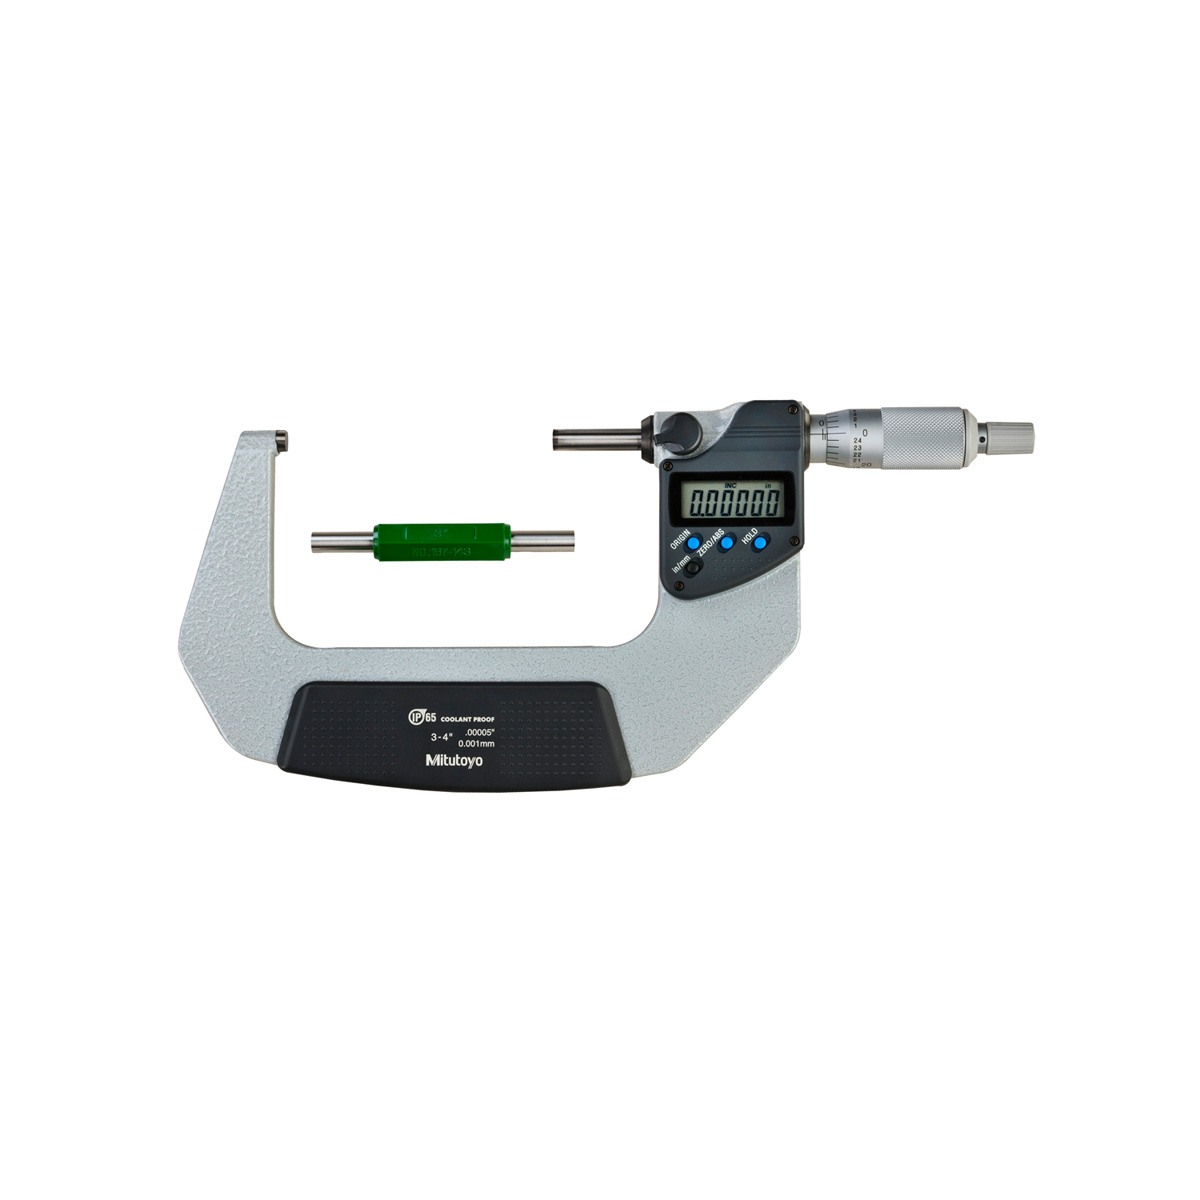 293-343-30 3-4 in. Digimatic Micrometer with 76-101 mm IP65 Ratchet Stop-No SPC Output -  Mitutoyo